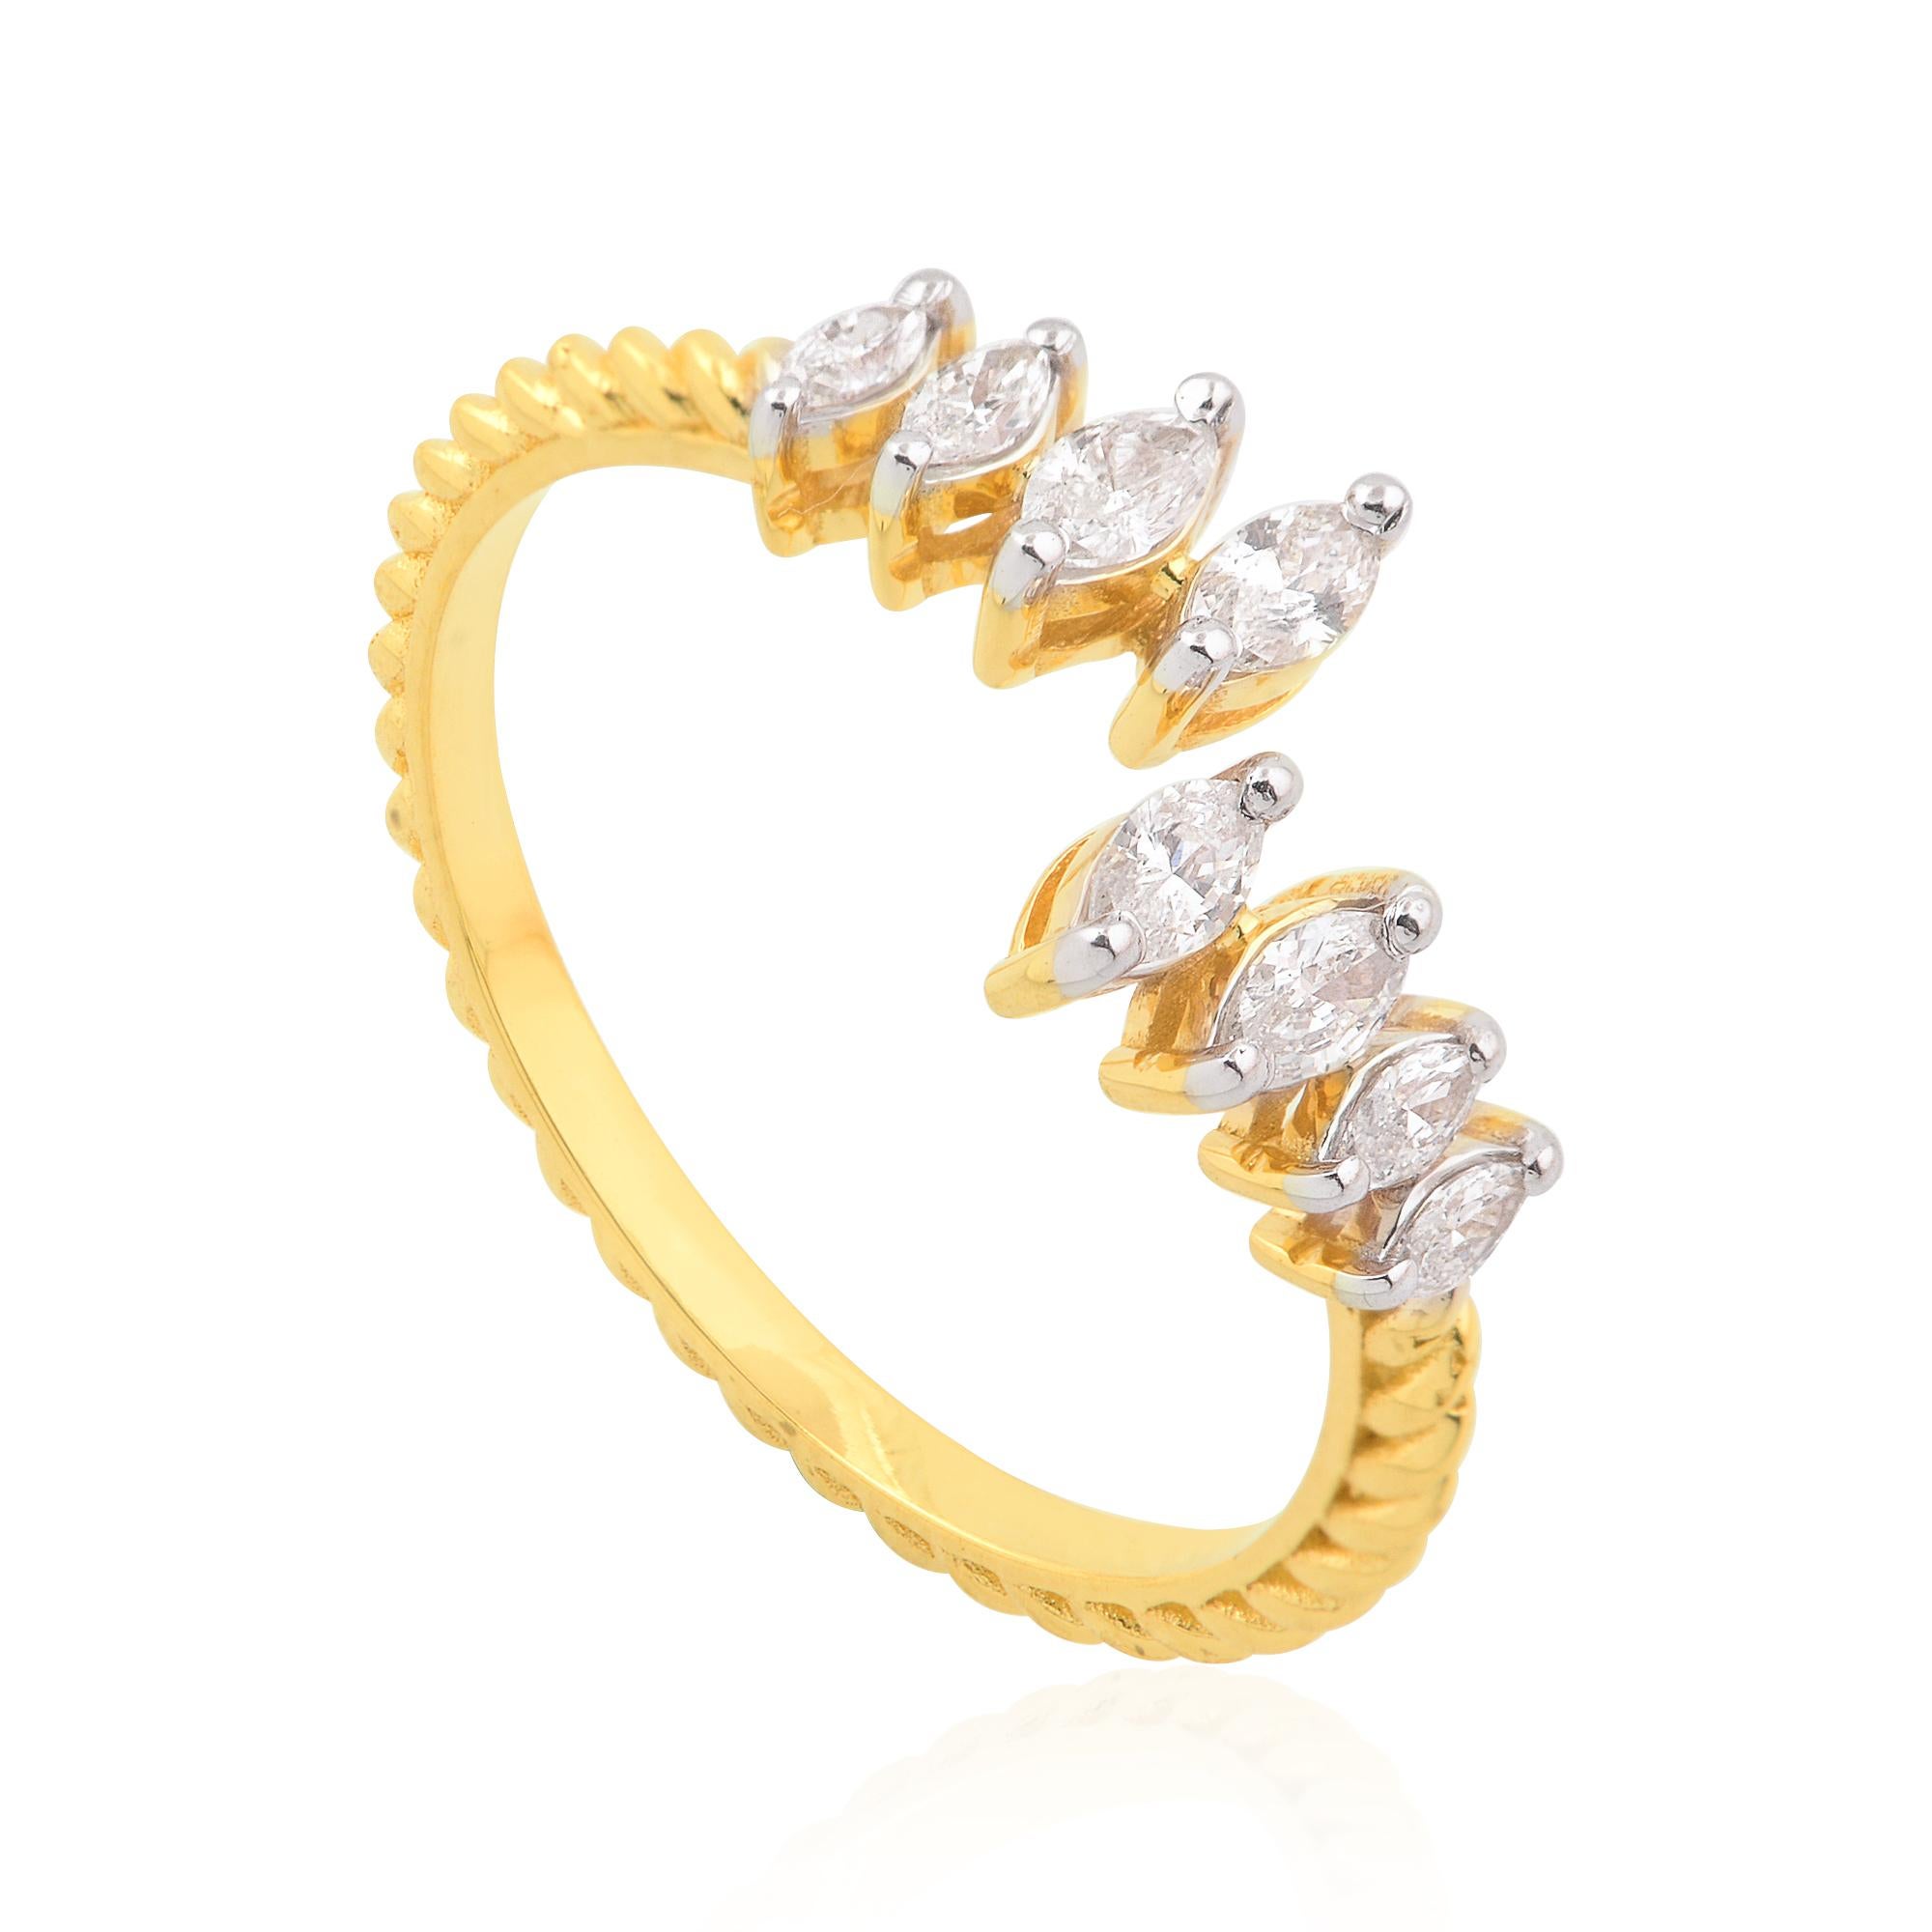 For Sale:  SI Clarity HI Color Marquise Diamond Wrap Ring 18 Karat Yellow Gold Fine Jewelry 3